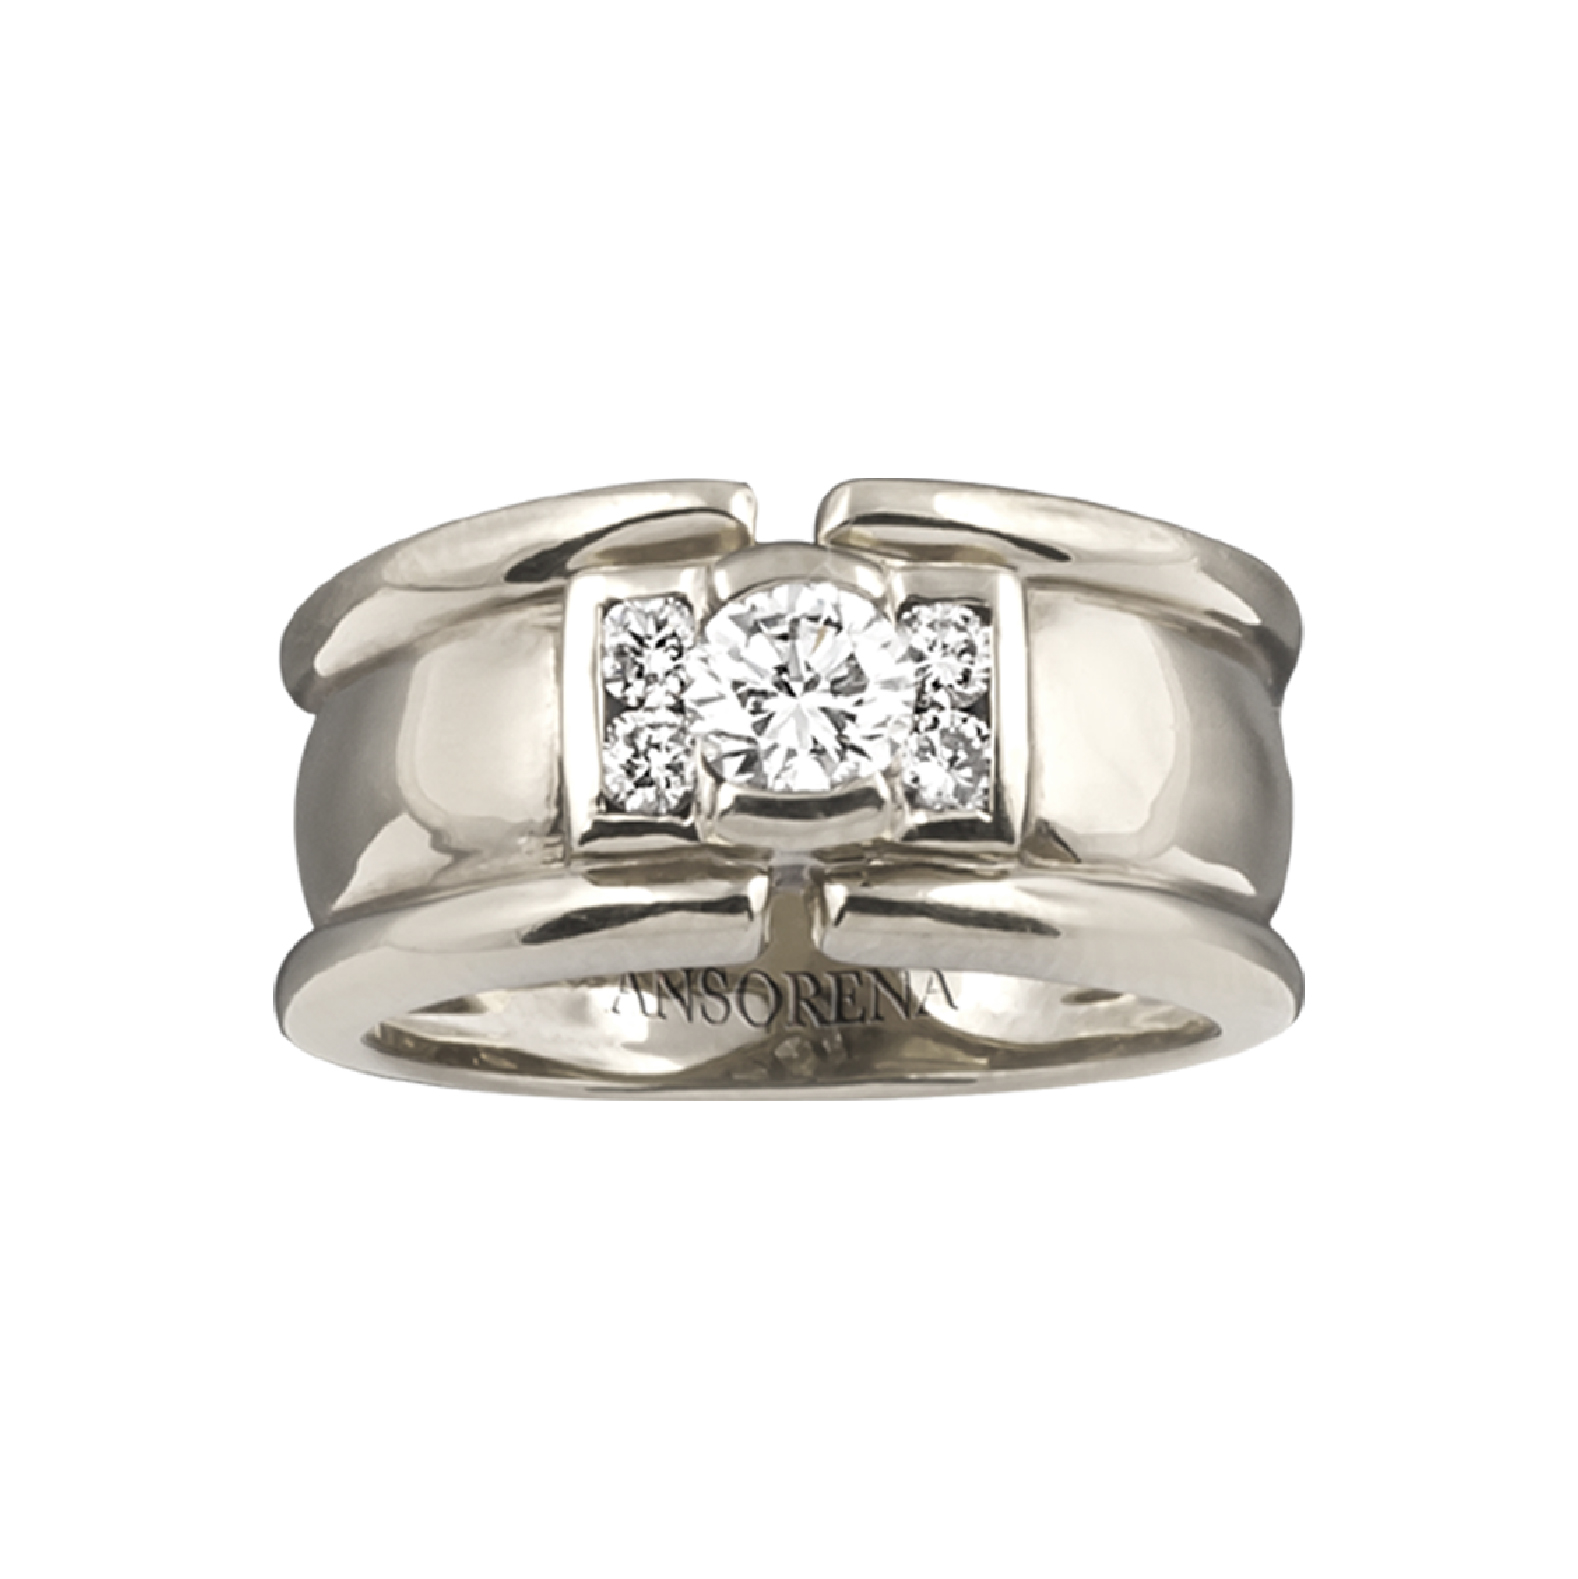 White gold band solitaire